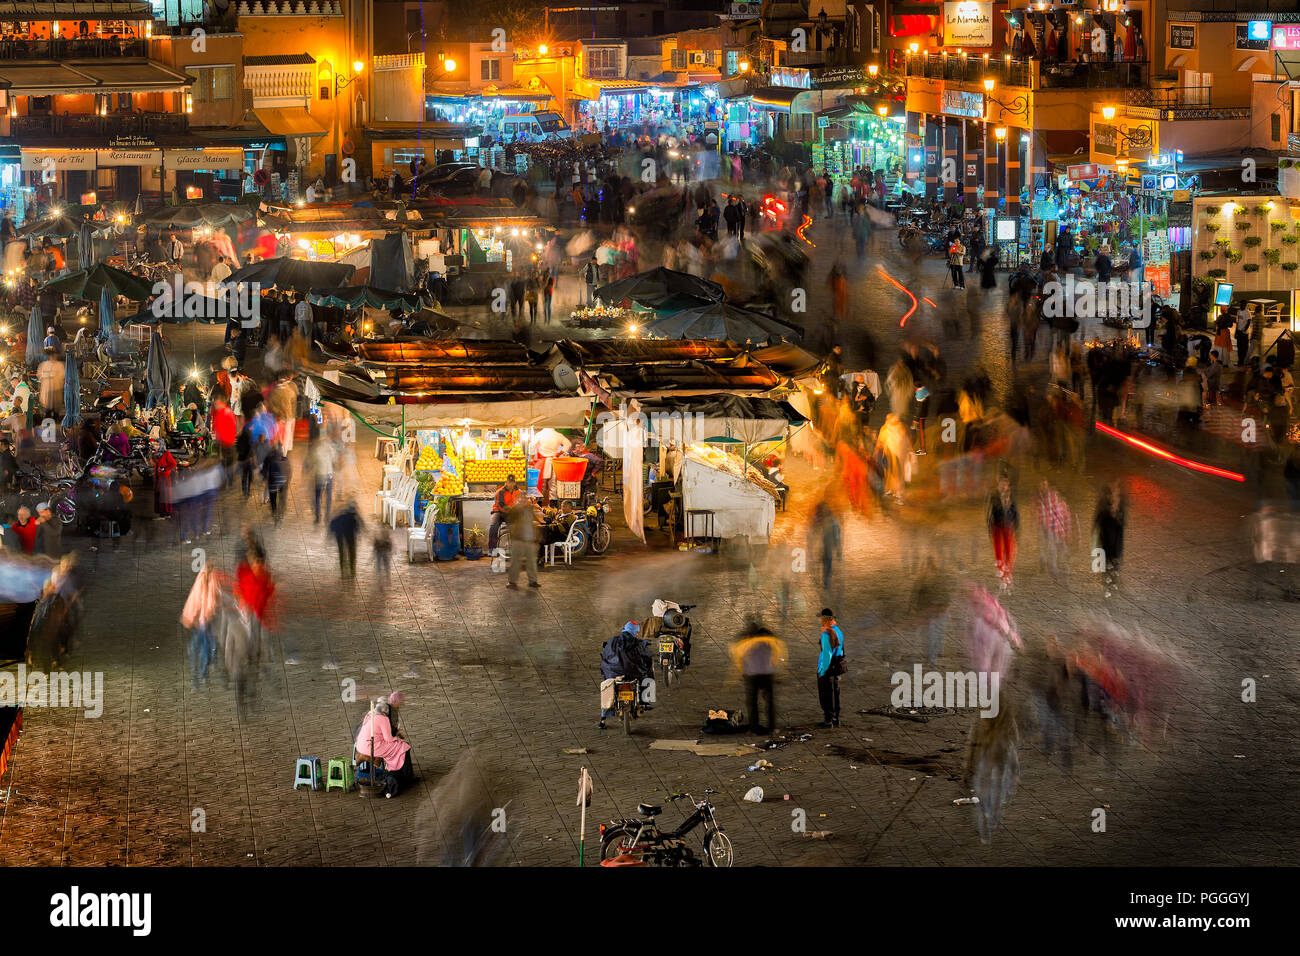 MOROCCO-DEC 24, 2012:The busy night market in the famous medina, a UNESCO site, in Marrakech, Morocco. In the evening the square fills with food stand Stock Photo